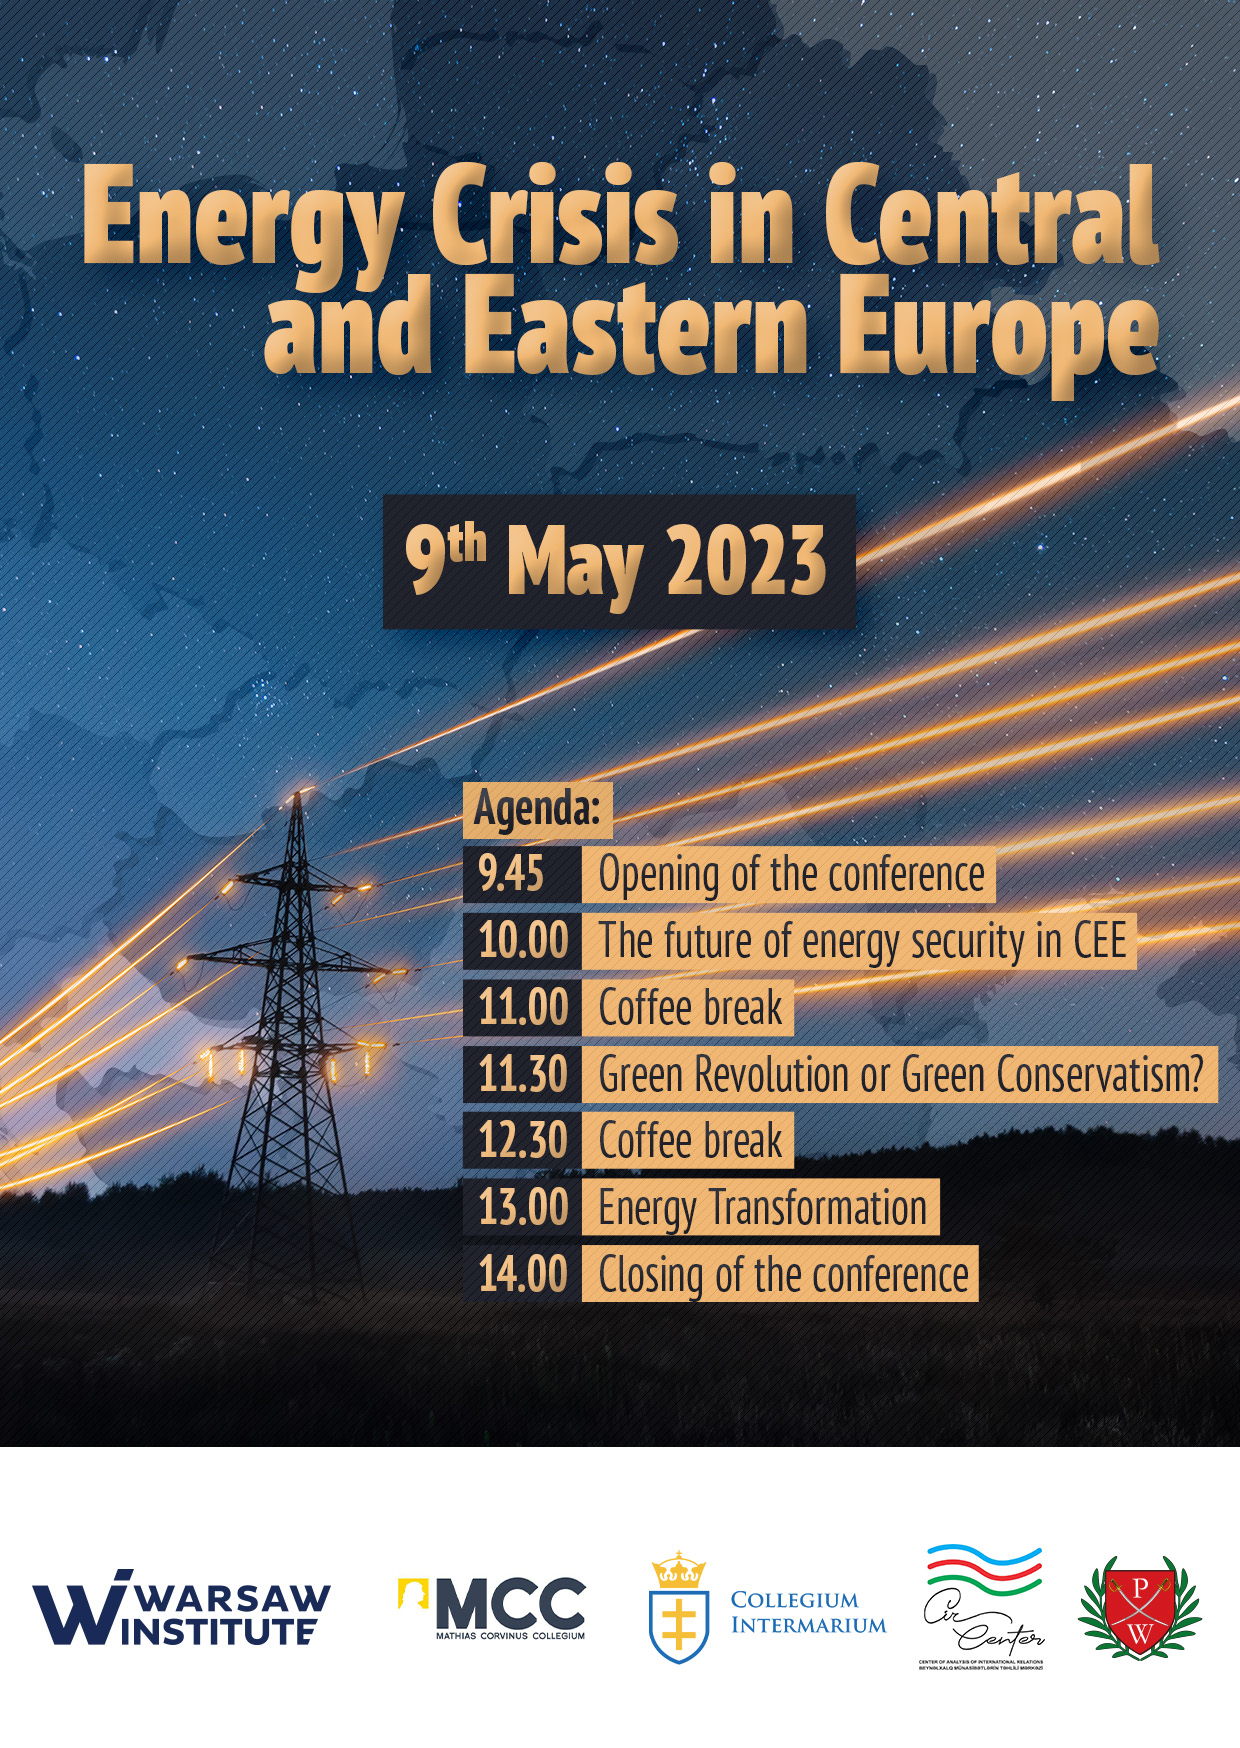 Energy Crisis in Central and Eastern Europe